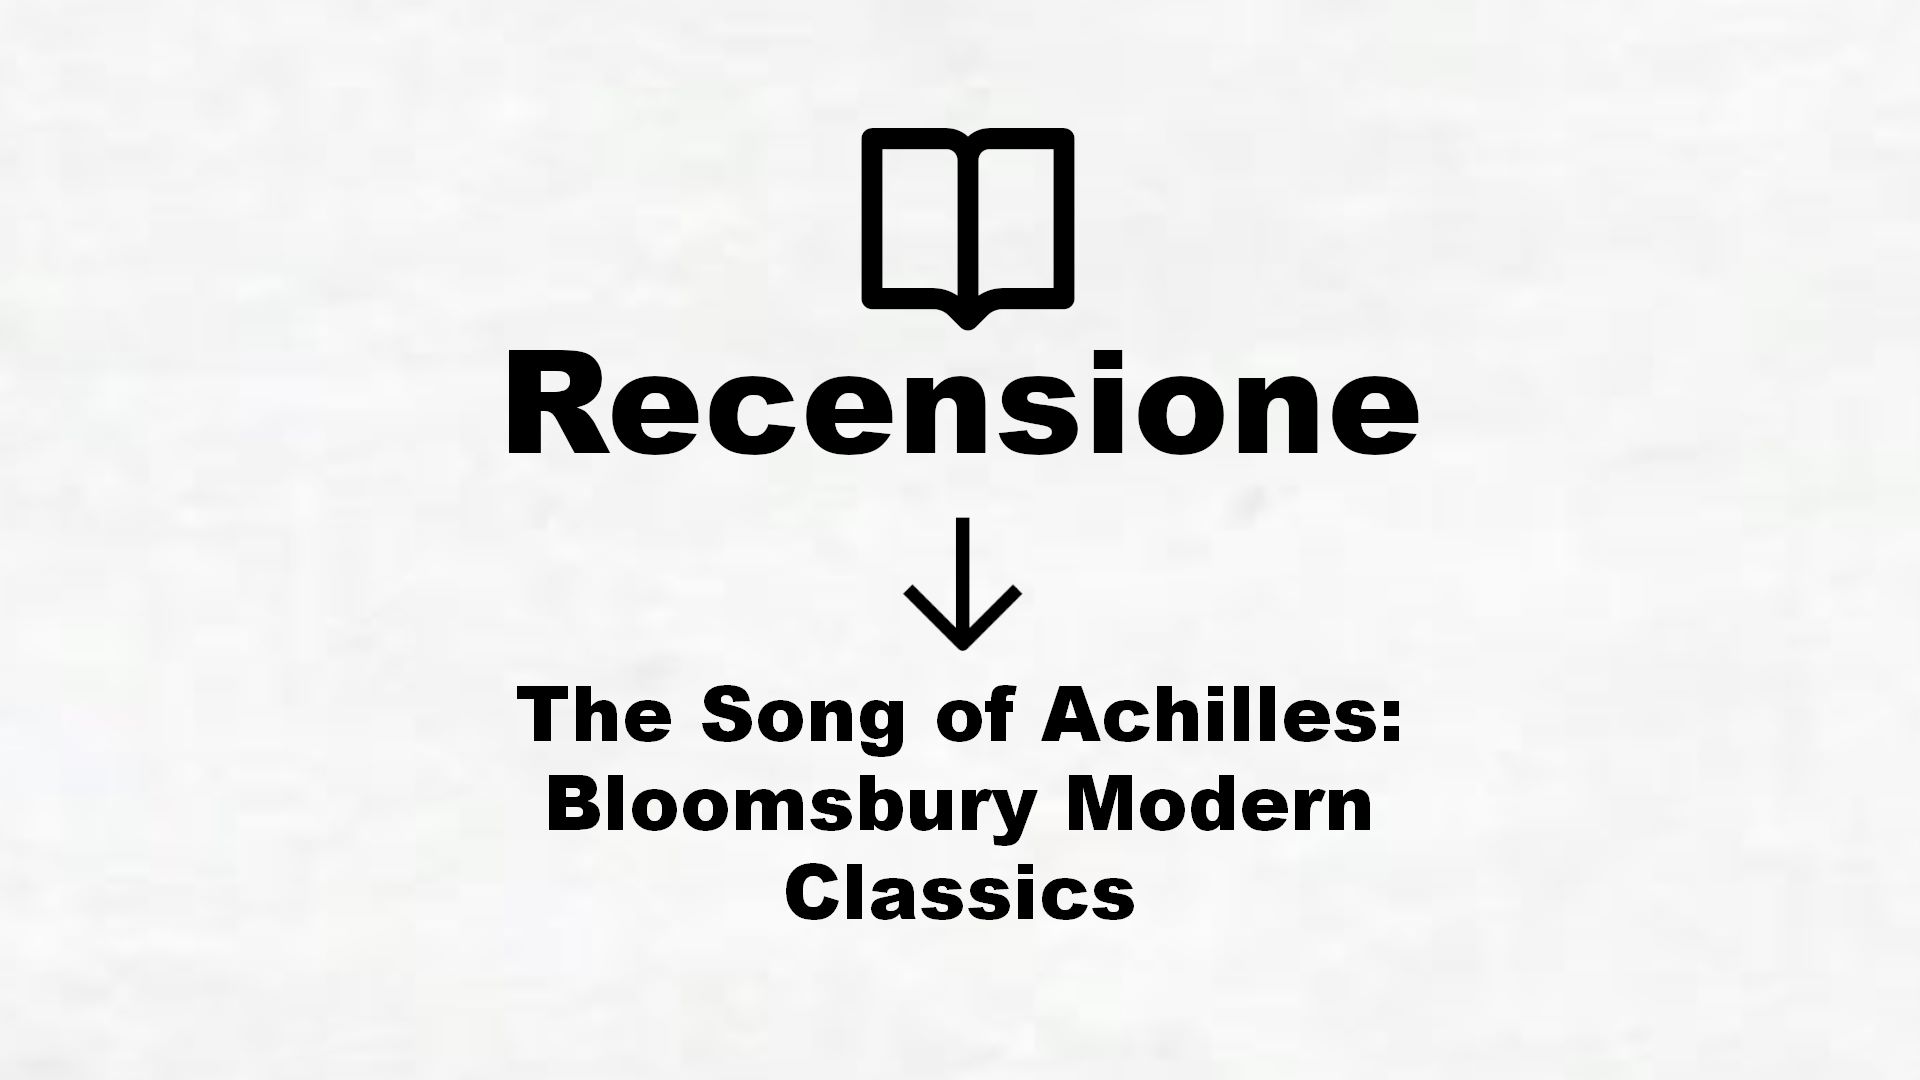 The Song of Achilles: Bloomsbury Modern Classics – Recensione Libro